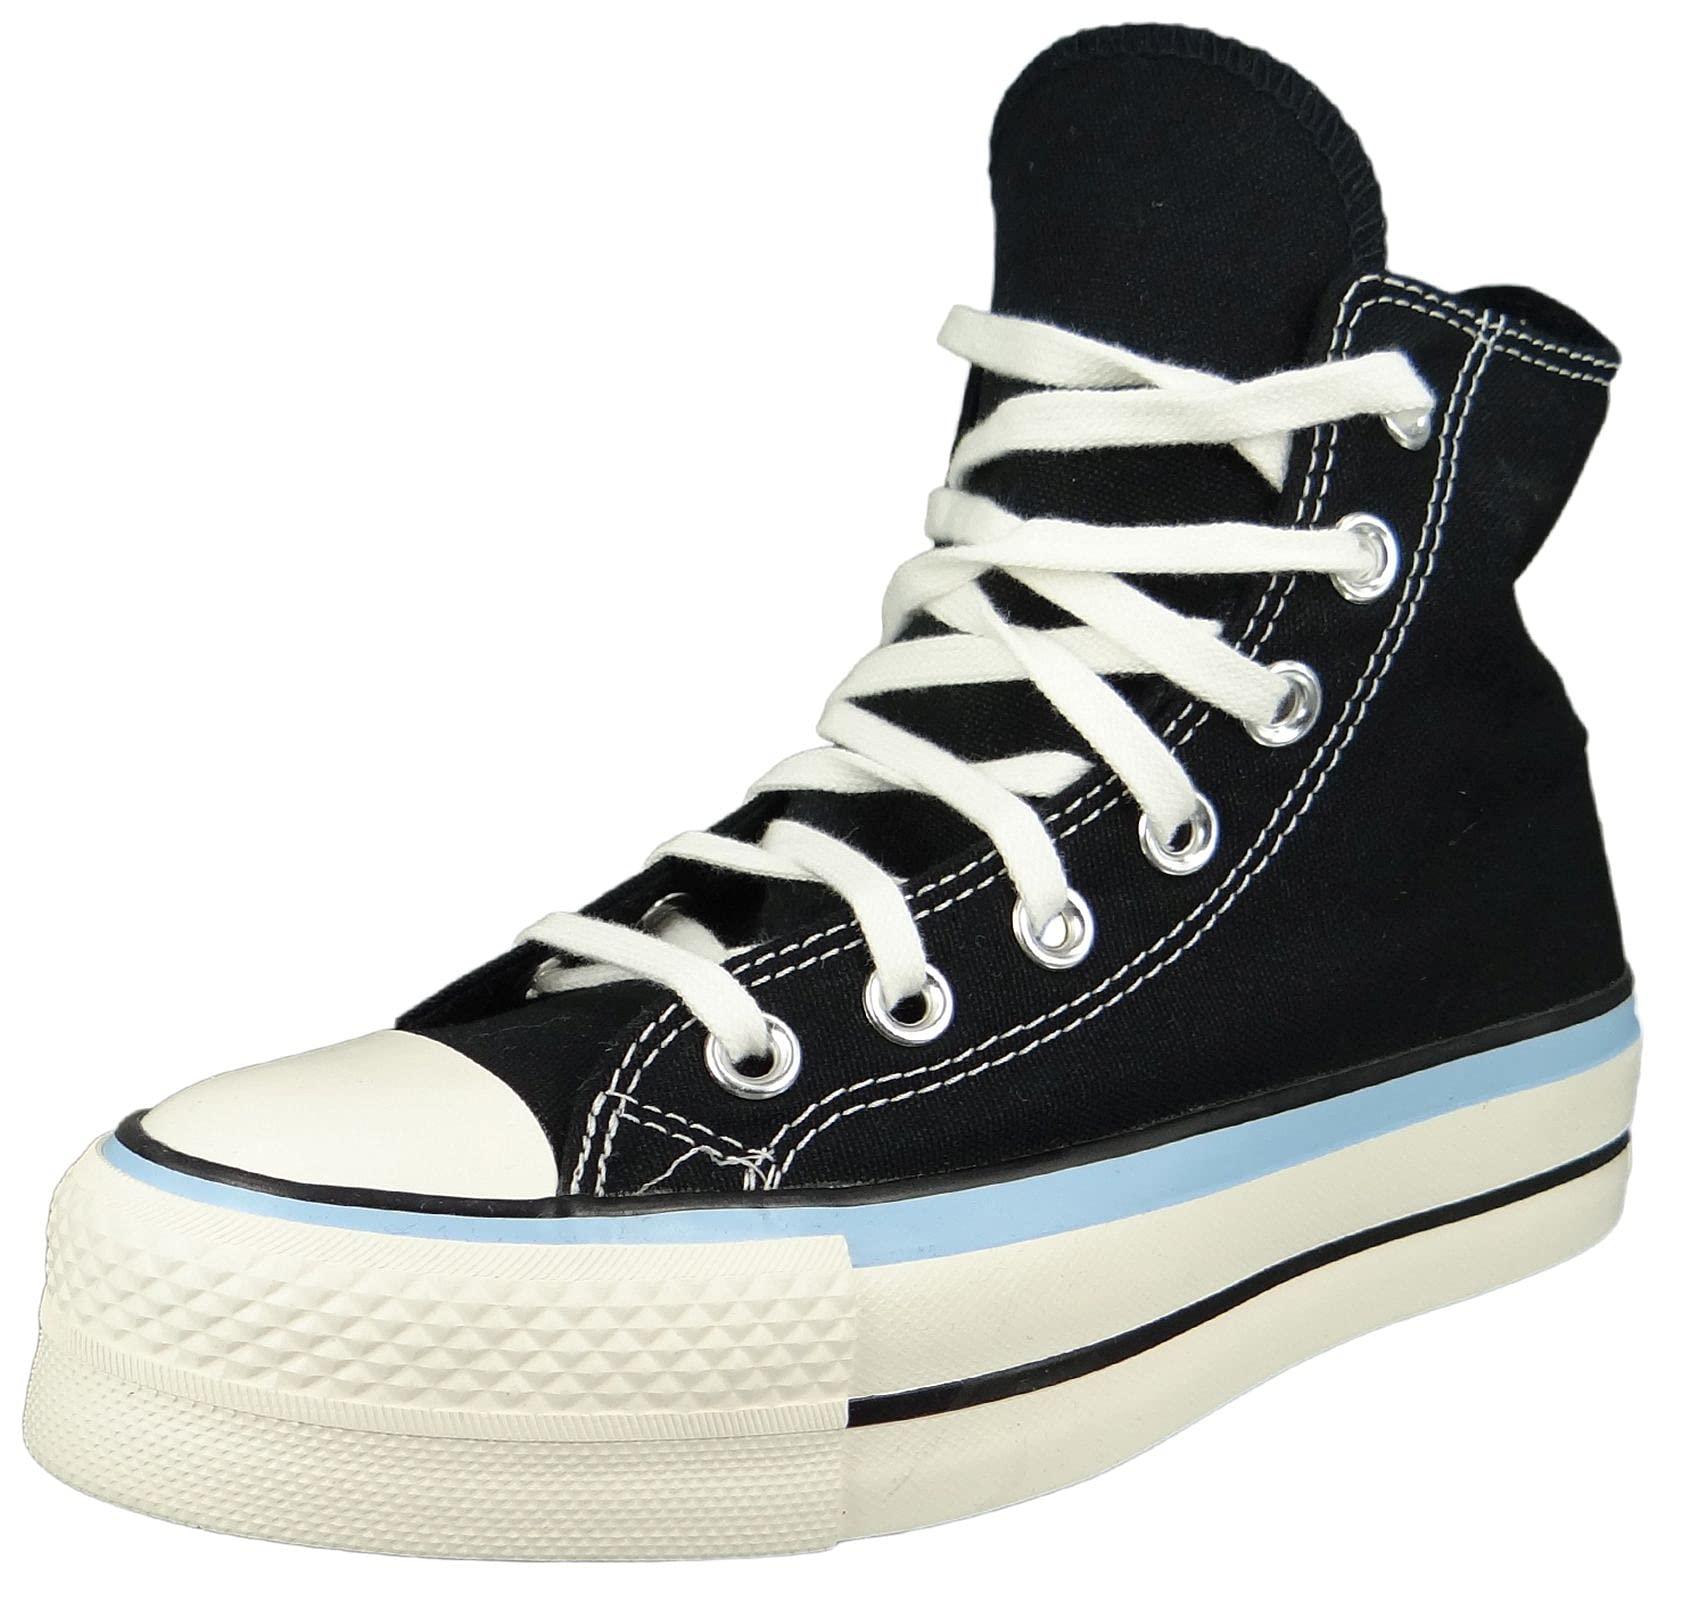 converse all star black and blue